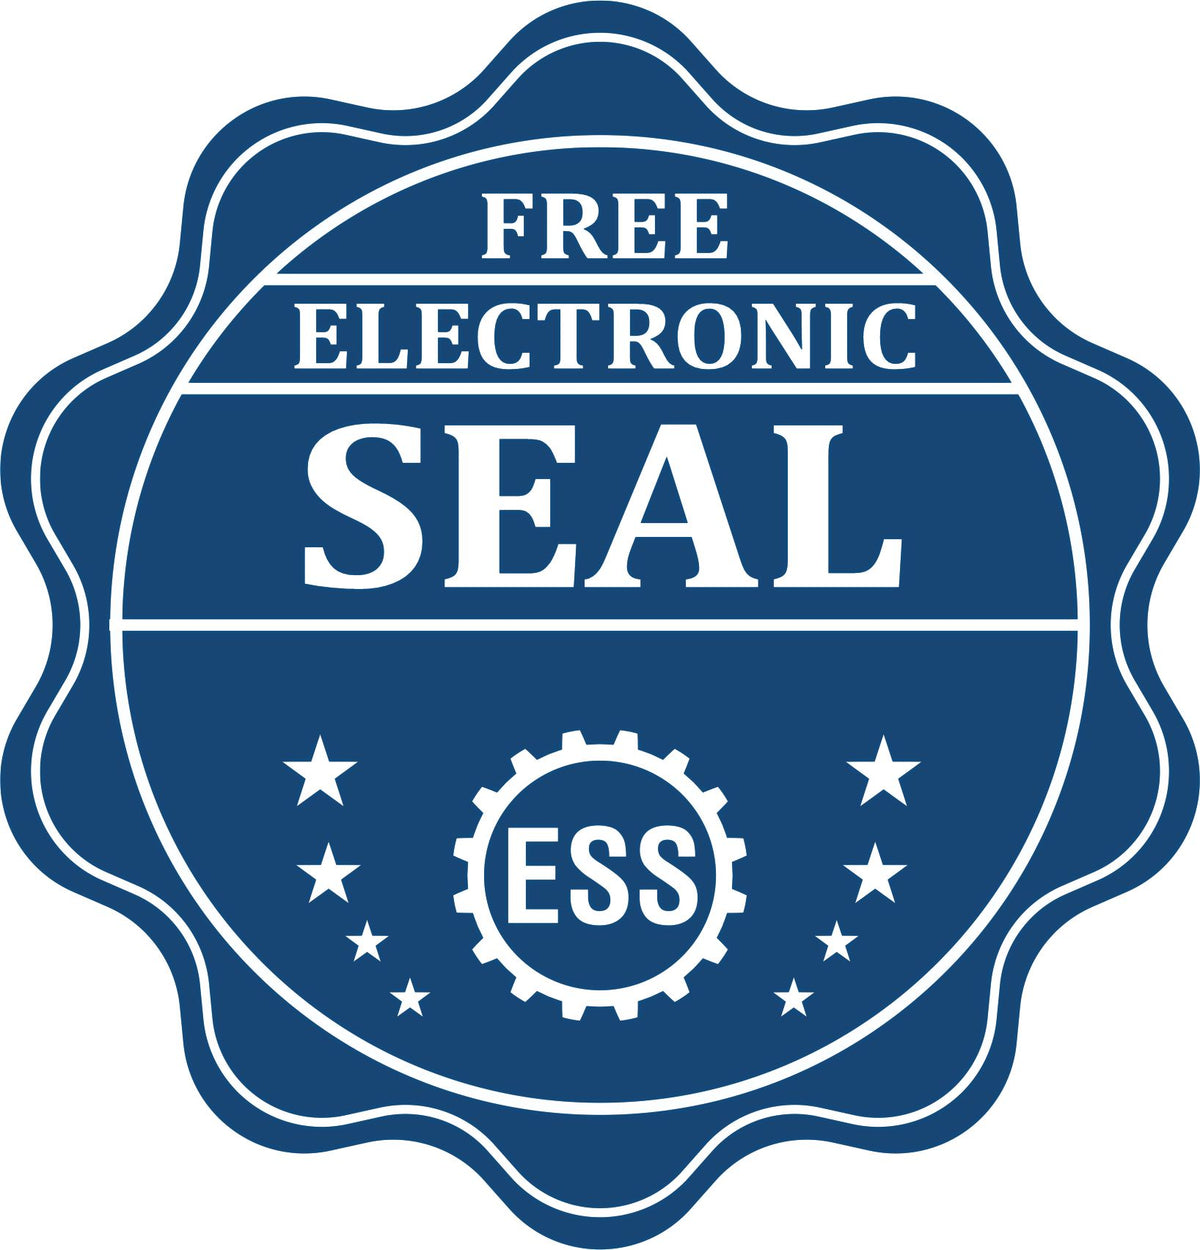 A badge showing a free electronic seal for the Super Slim Puerto Rico Notary Public Stamp with stars and the ESS gear on the emblem.